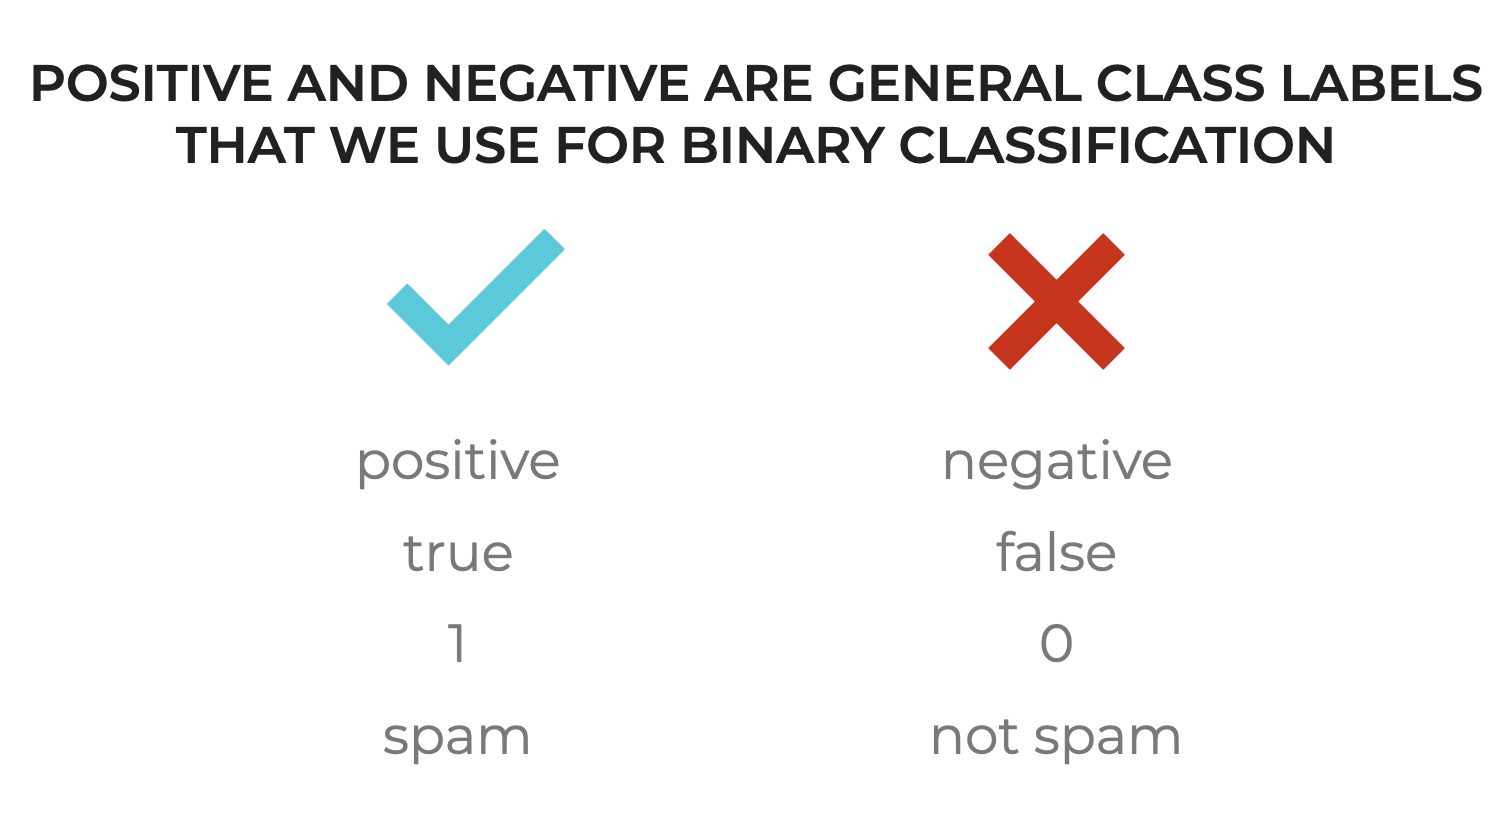 An image that shows positive and negative classes, and how they are general labels in binary classification.